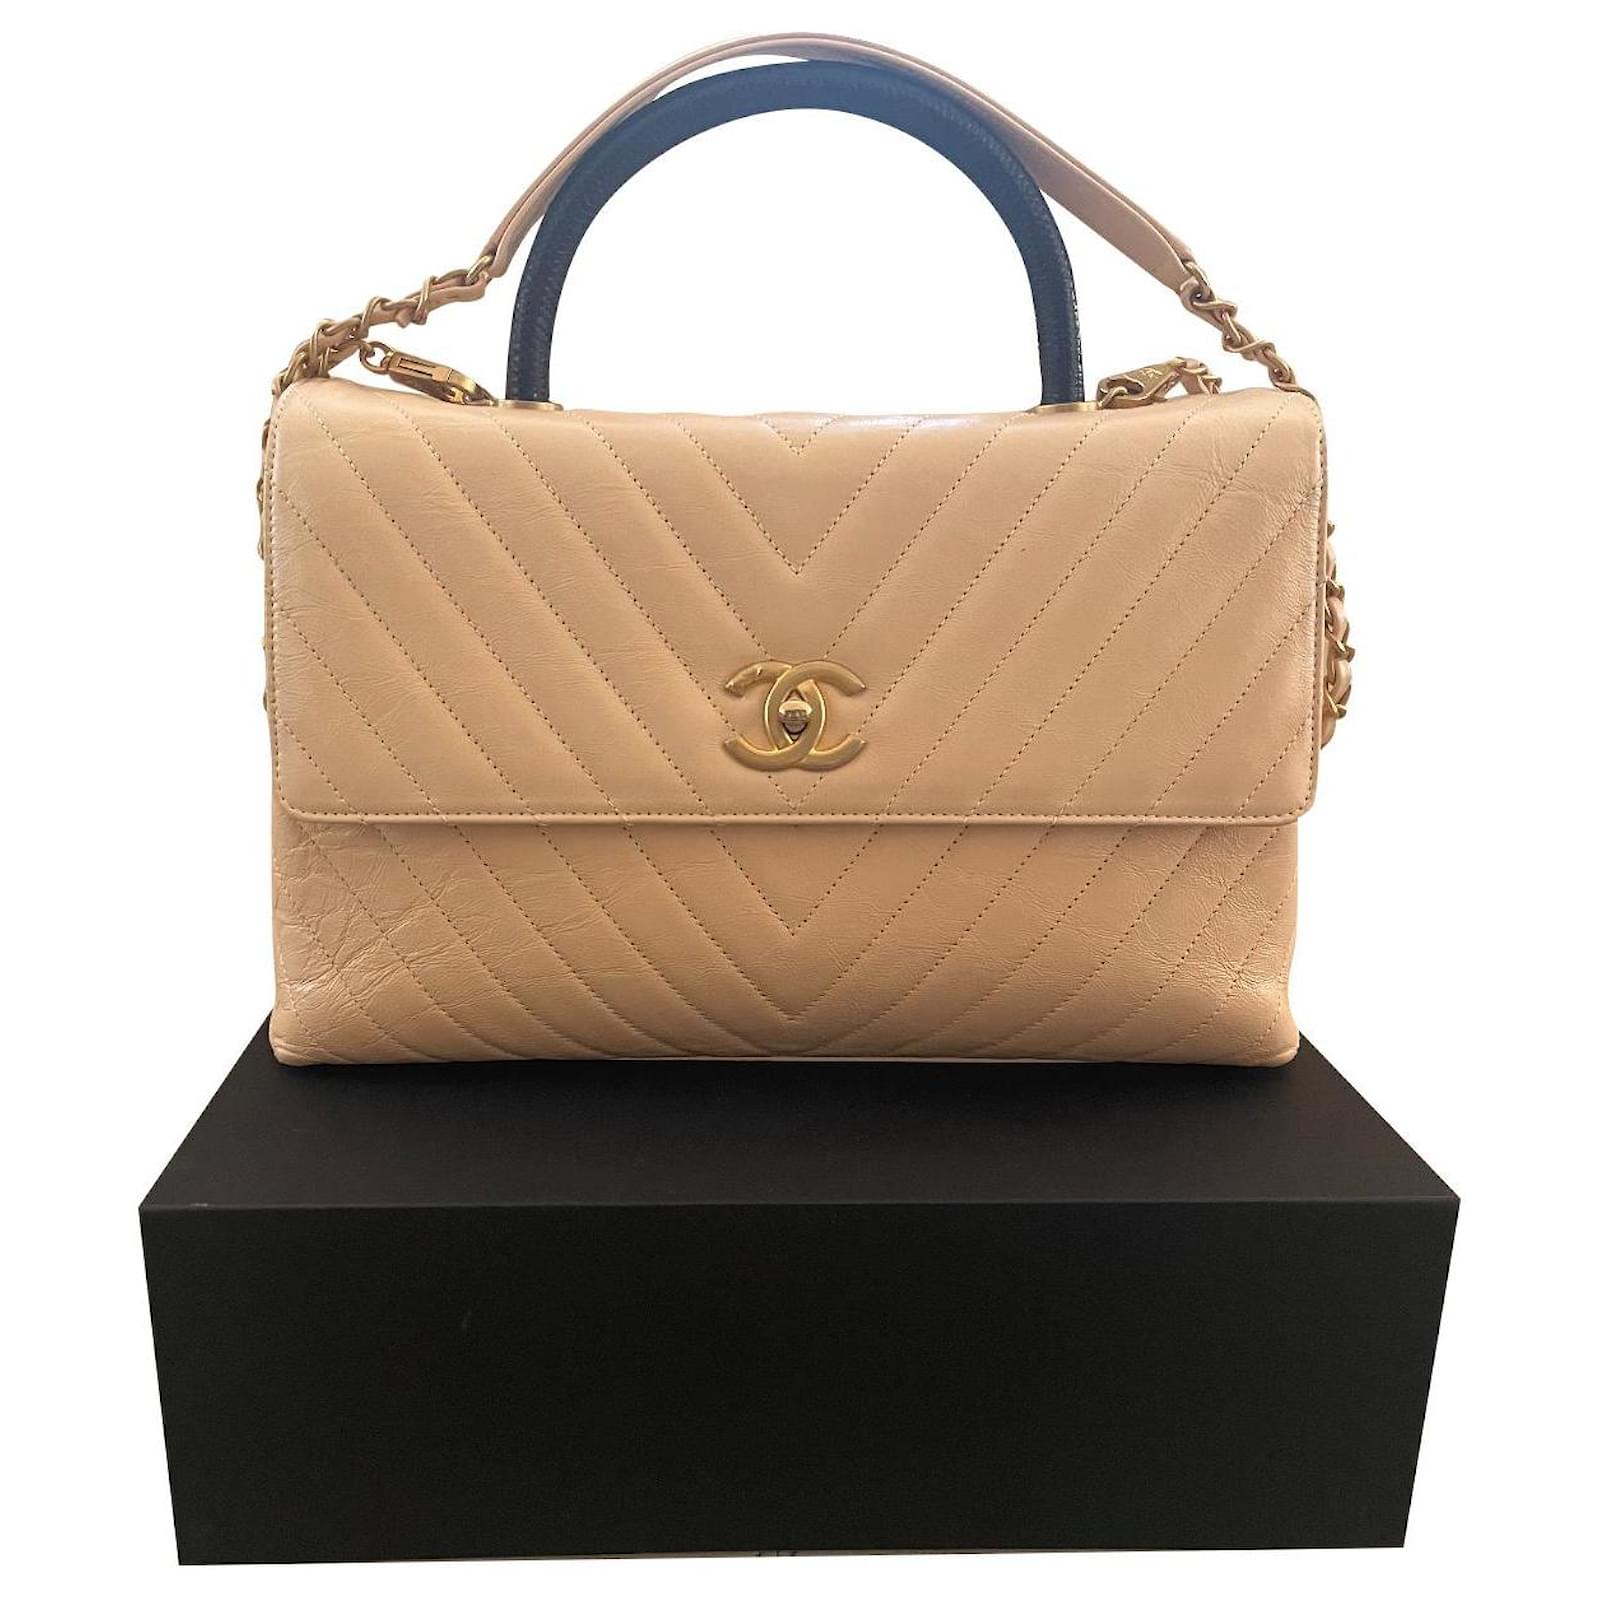 Chanel - Authenticated Coco Handle Handbag - Leather Camel Plain for Women, Never Worn